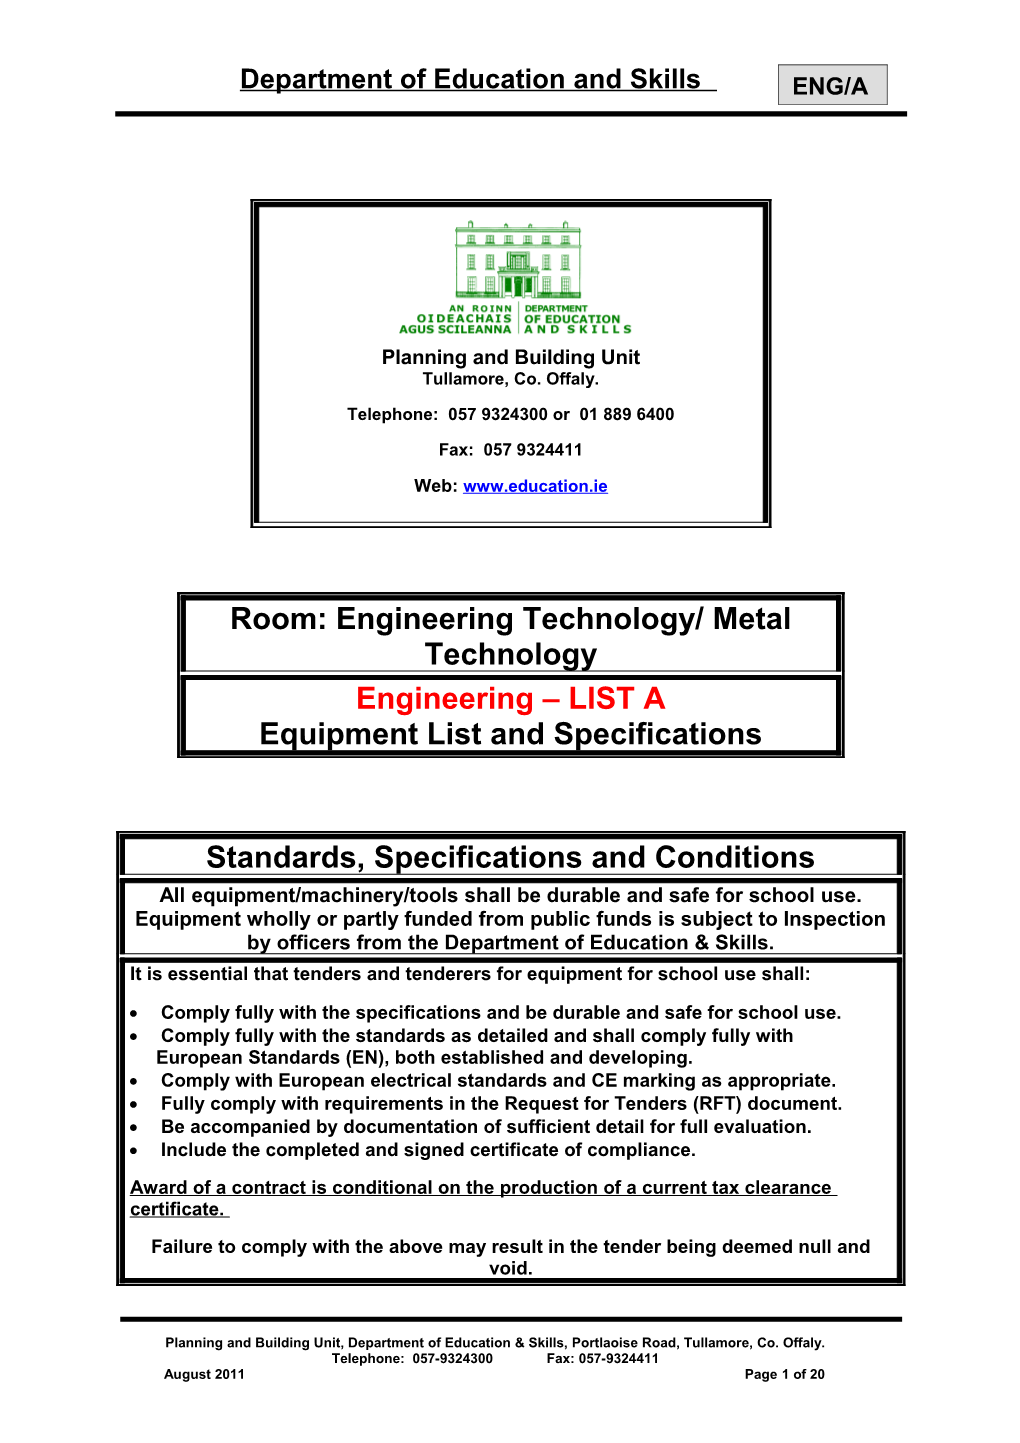 Room: Engineering/Metal Technology - Engineering ENGM Equipment List and Specifications